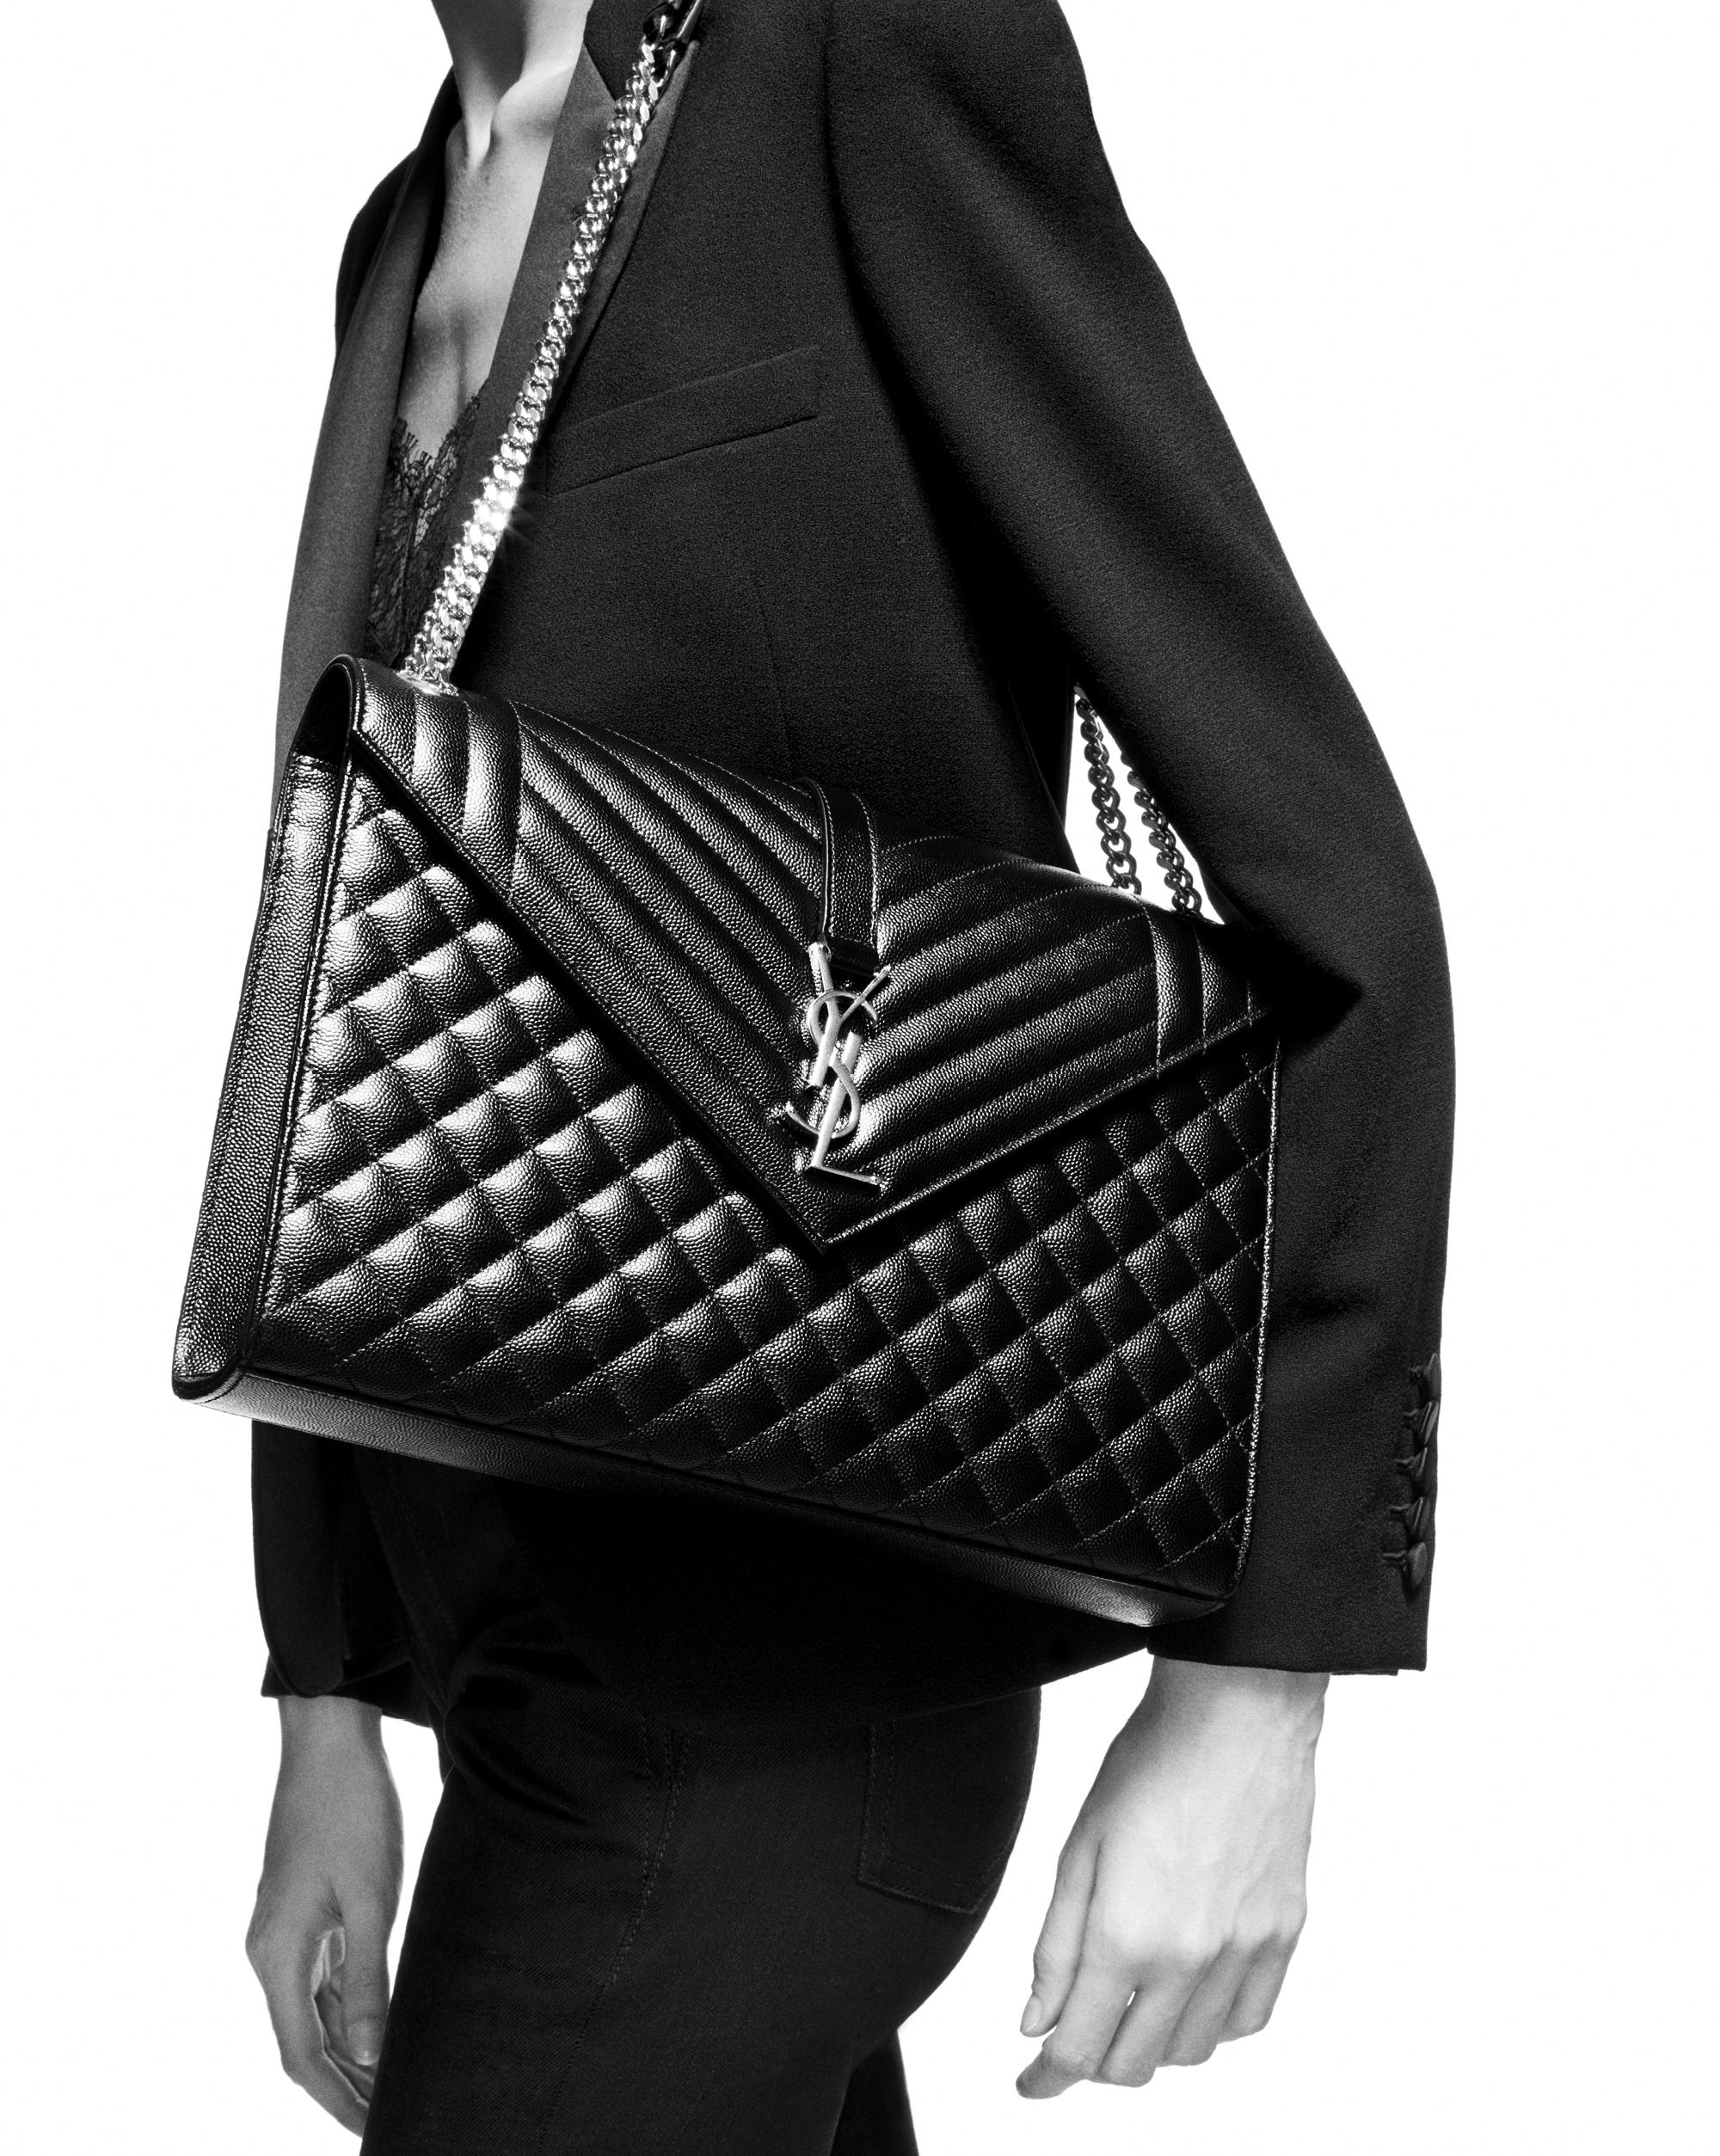 YSL Small Envelope Bag in Grained Embossed Quilted Leather - Top